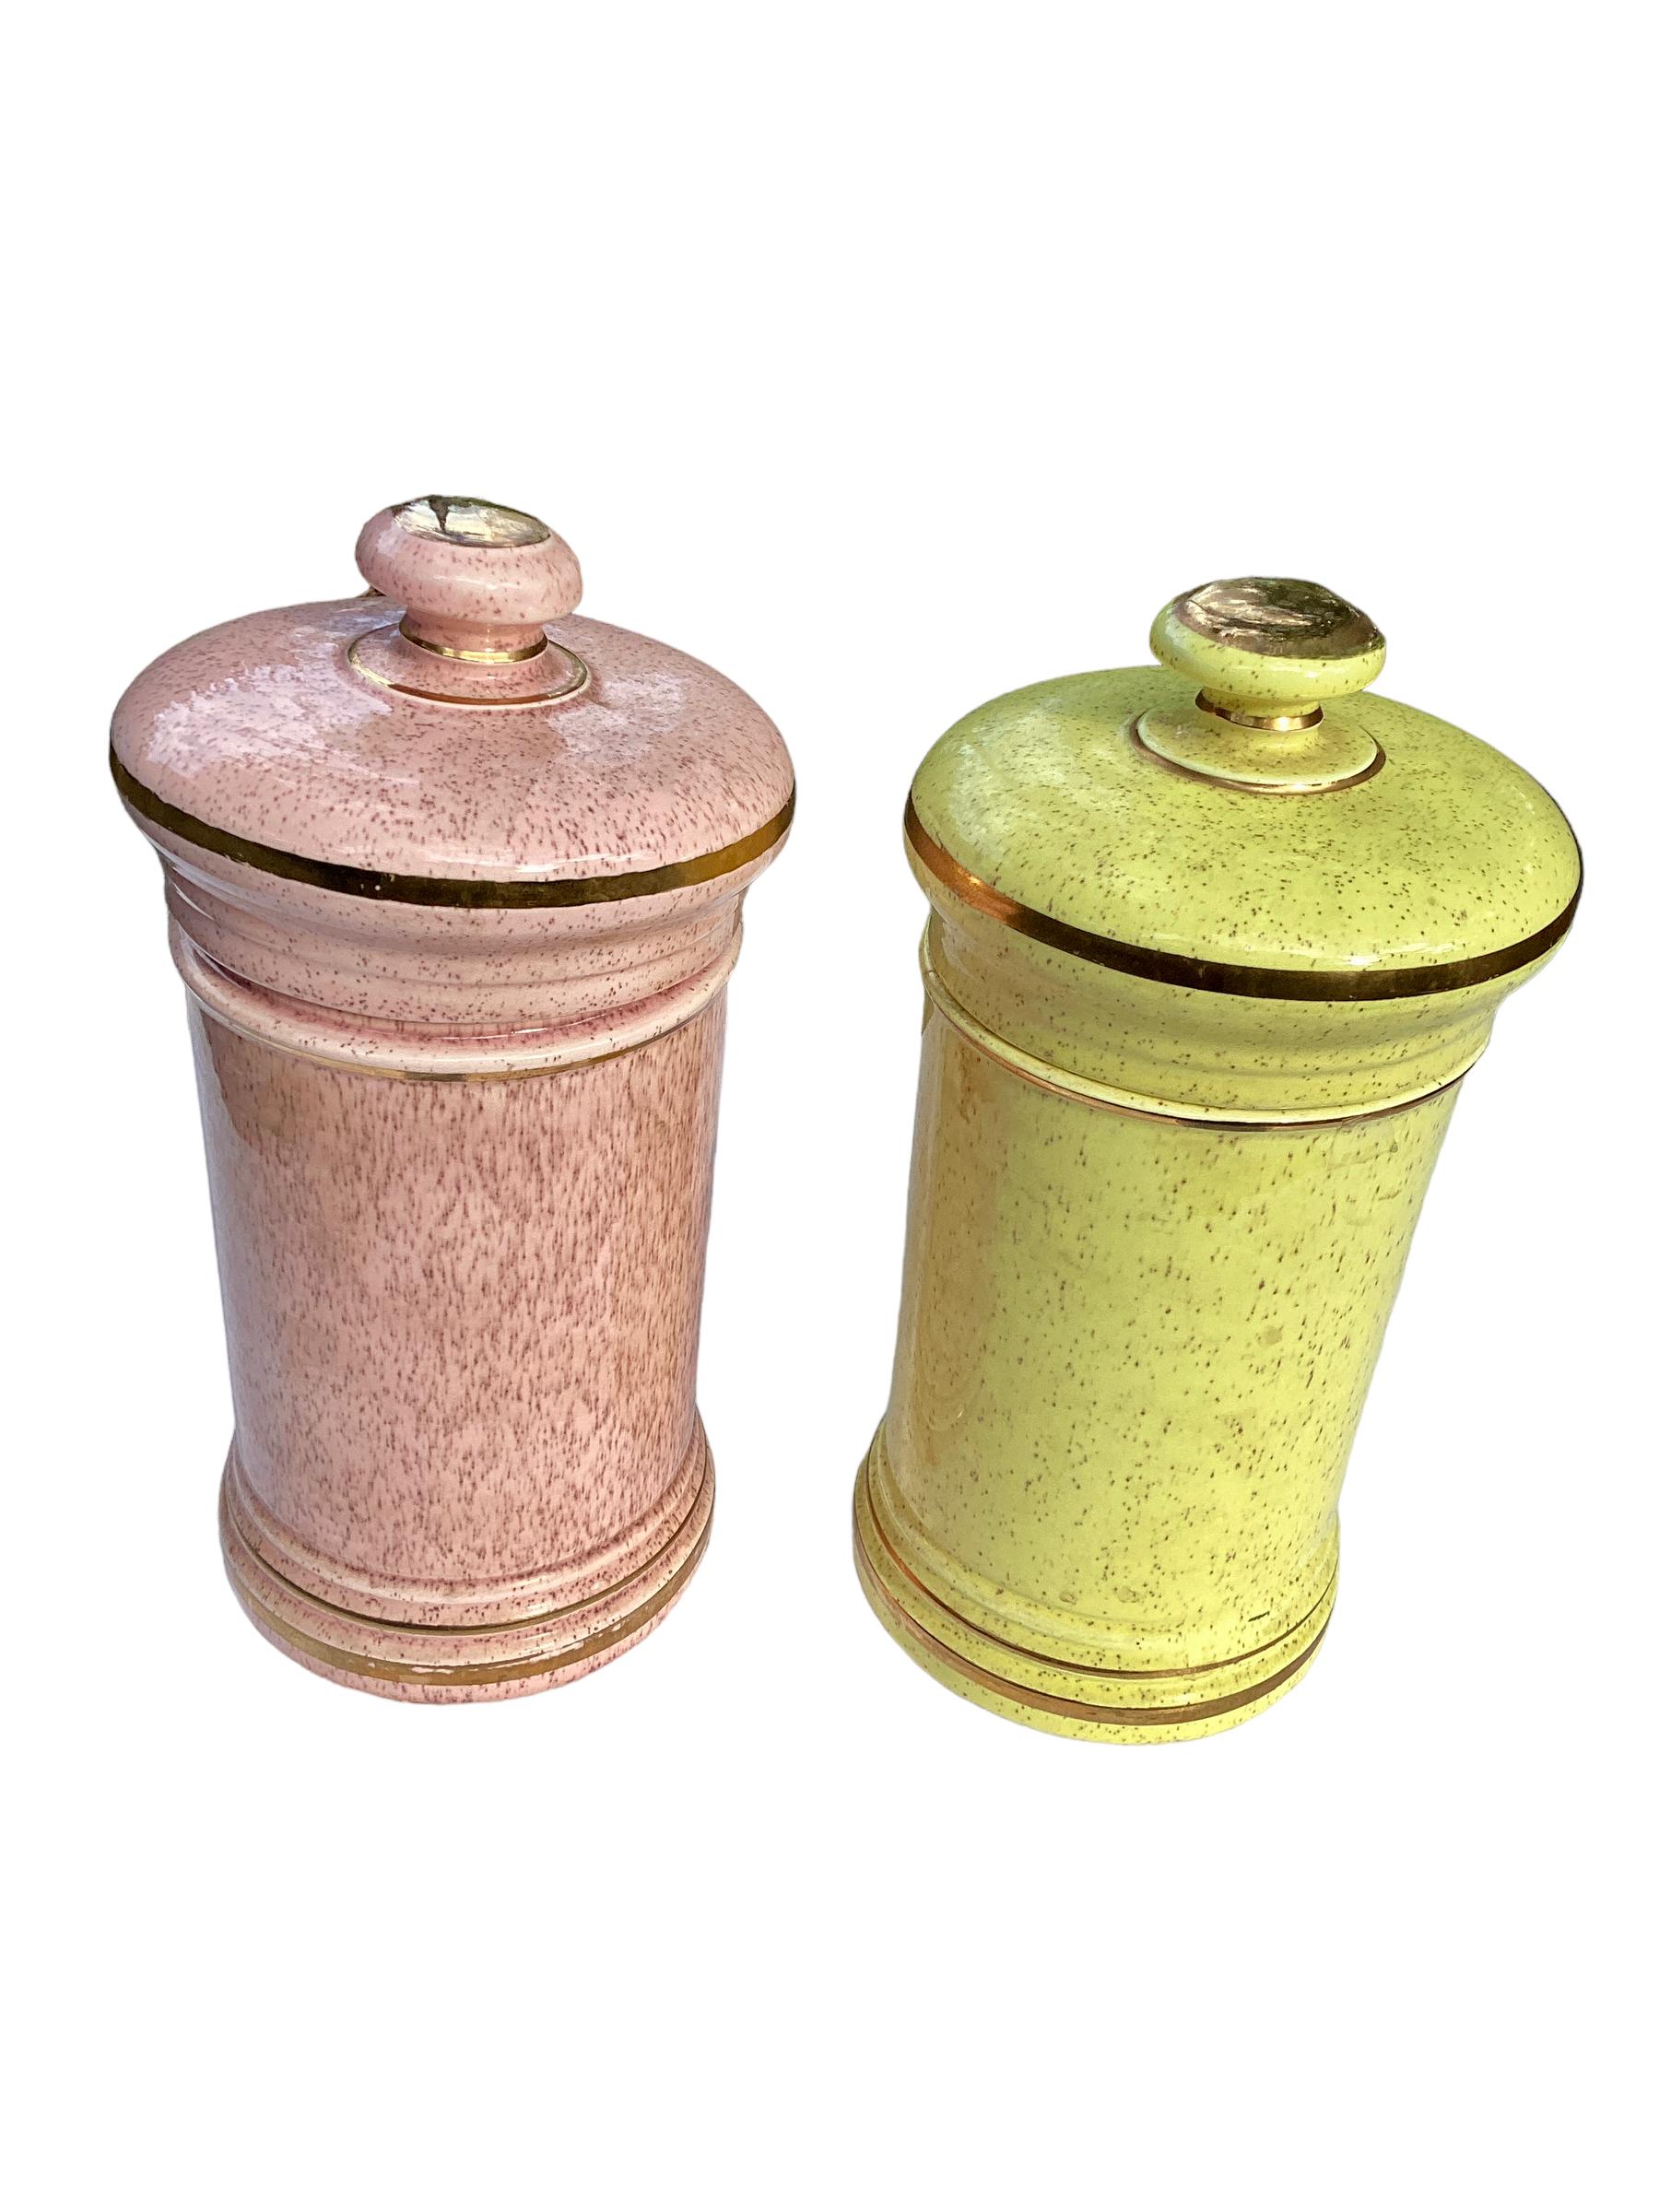 Pair of Antique American Covered Apothecary Jars In Good Condition For Sale In Chapel Hill, NC